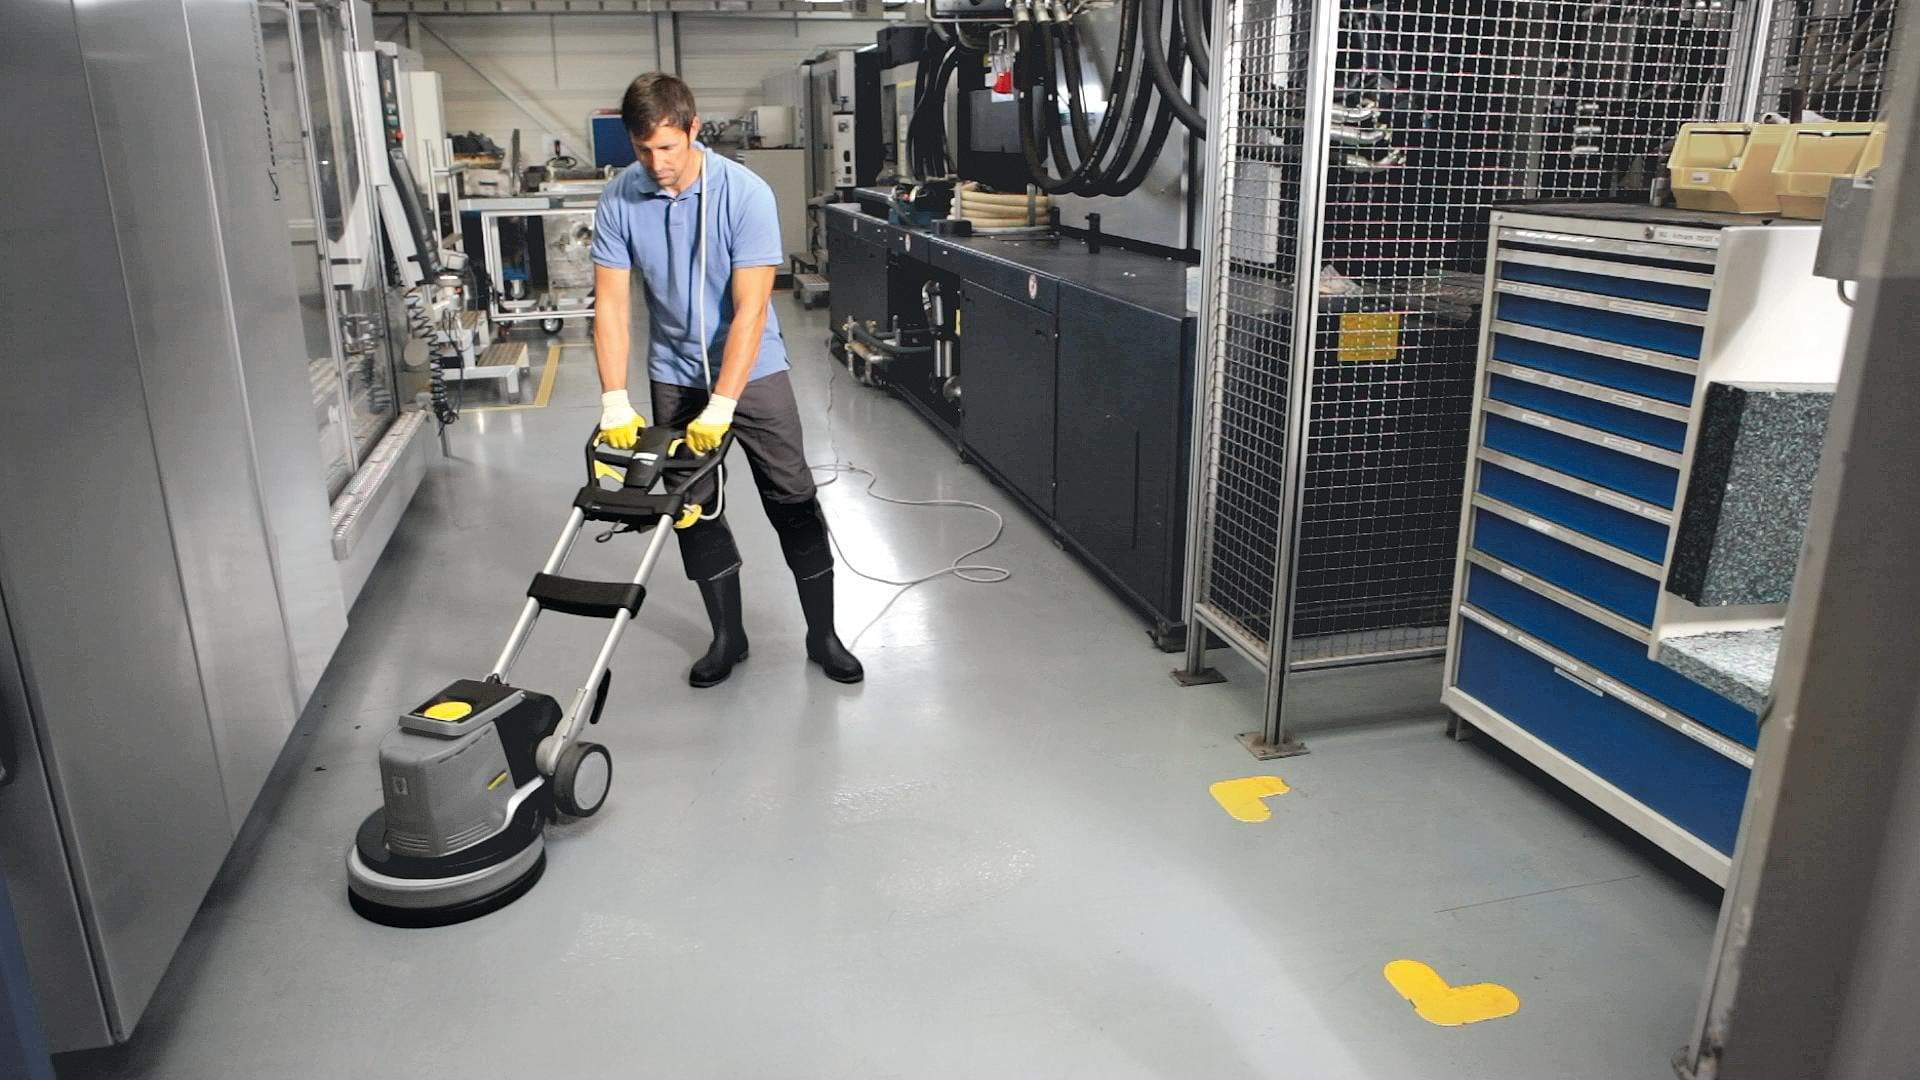 Karcher Stair Cleaning Machine - BD 17/5 C | Supply Master | Accra, Ghana Tools Building Steel Engineering Hardware tool